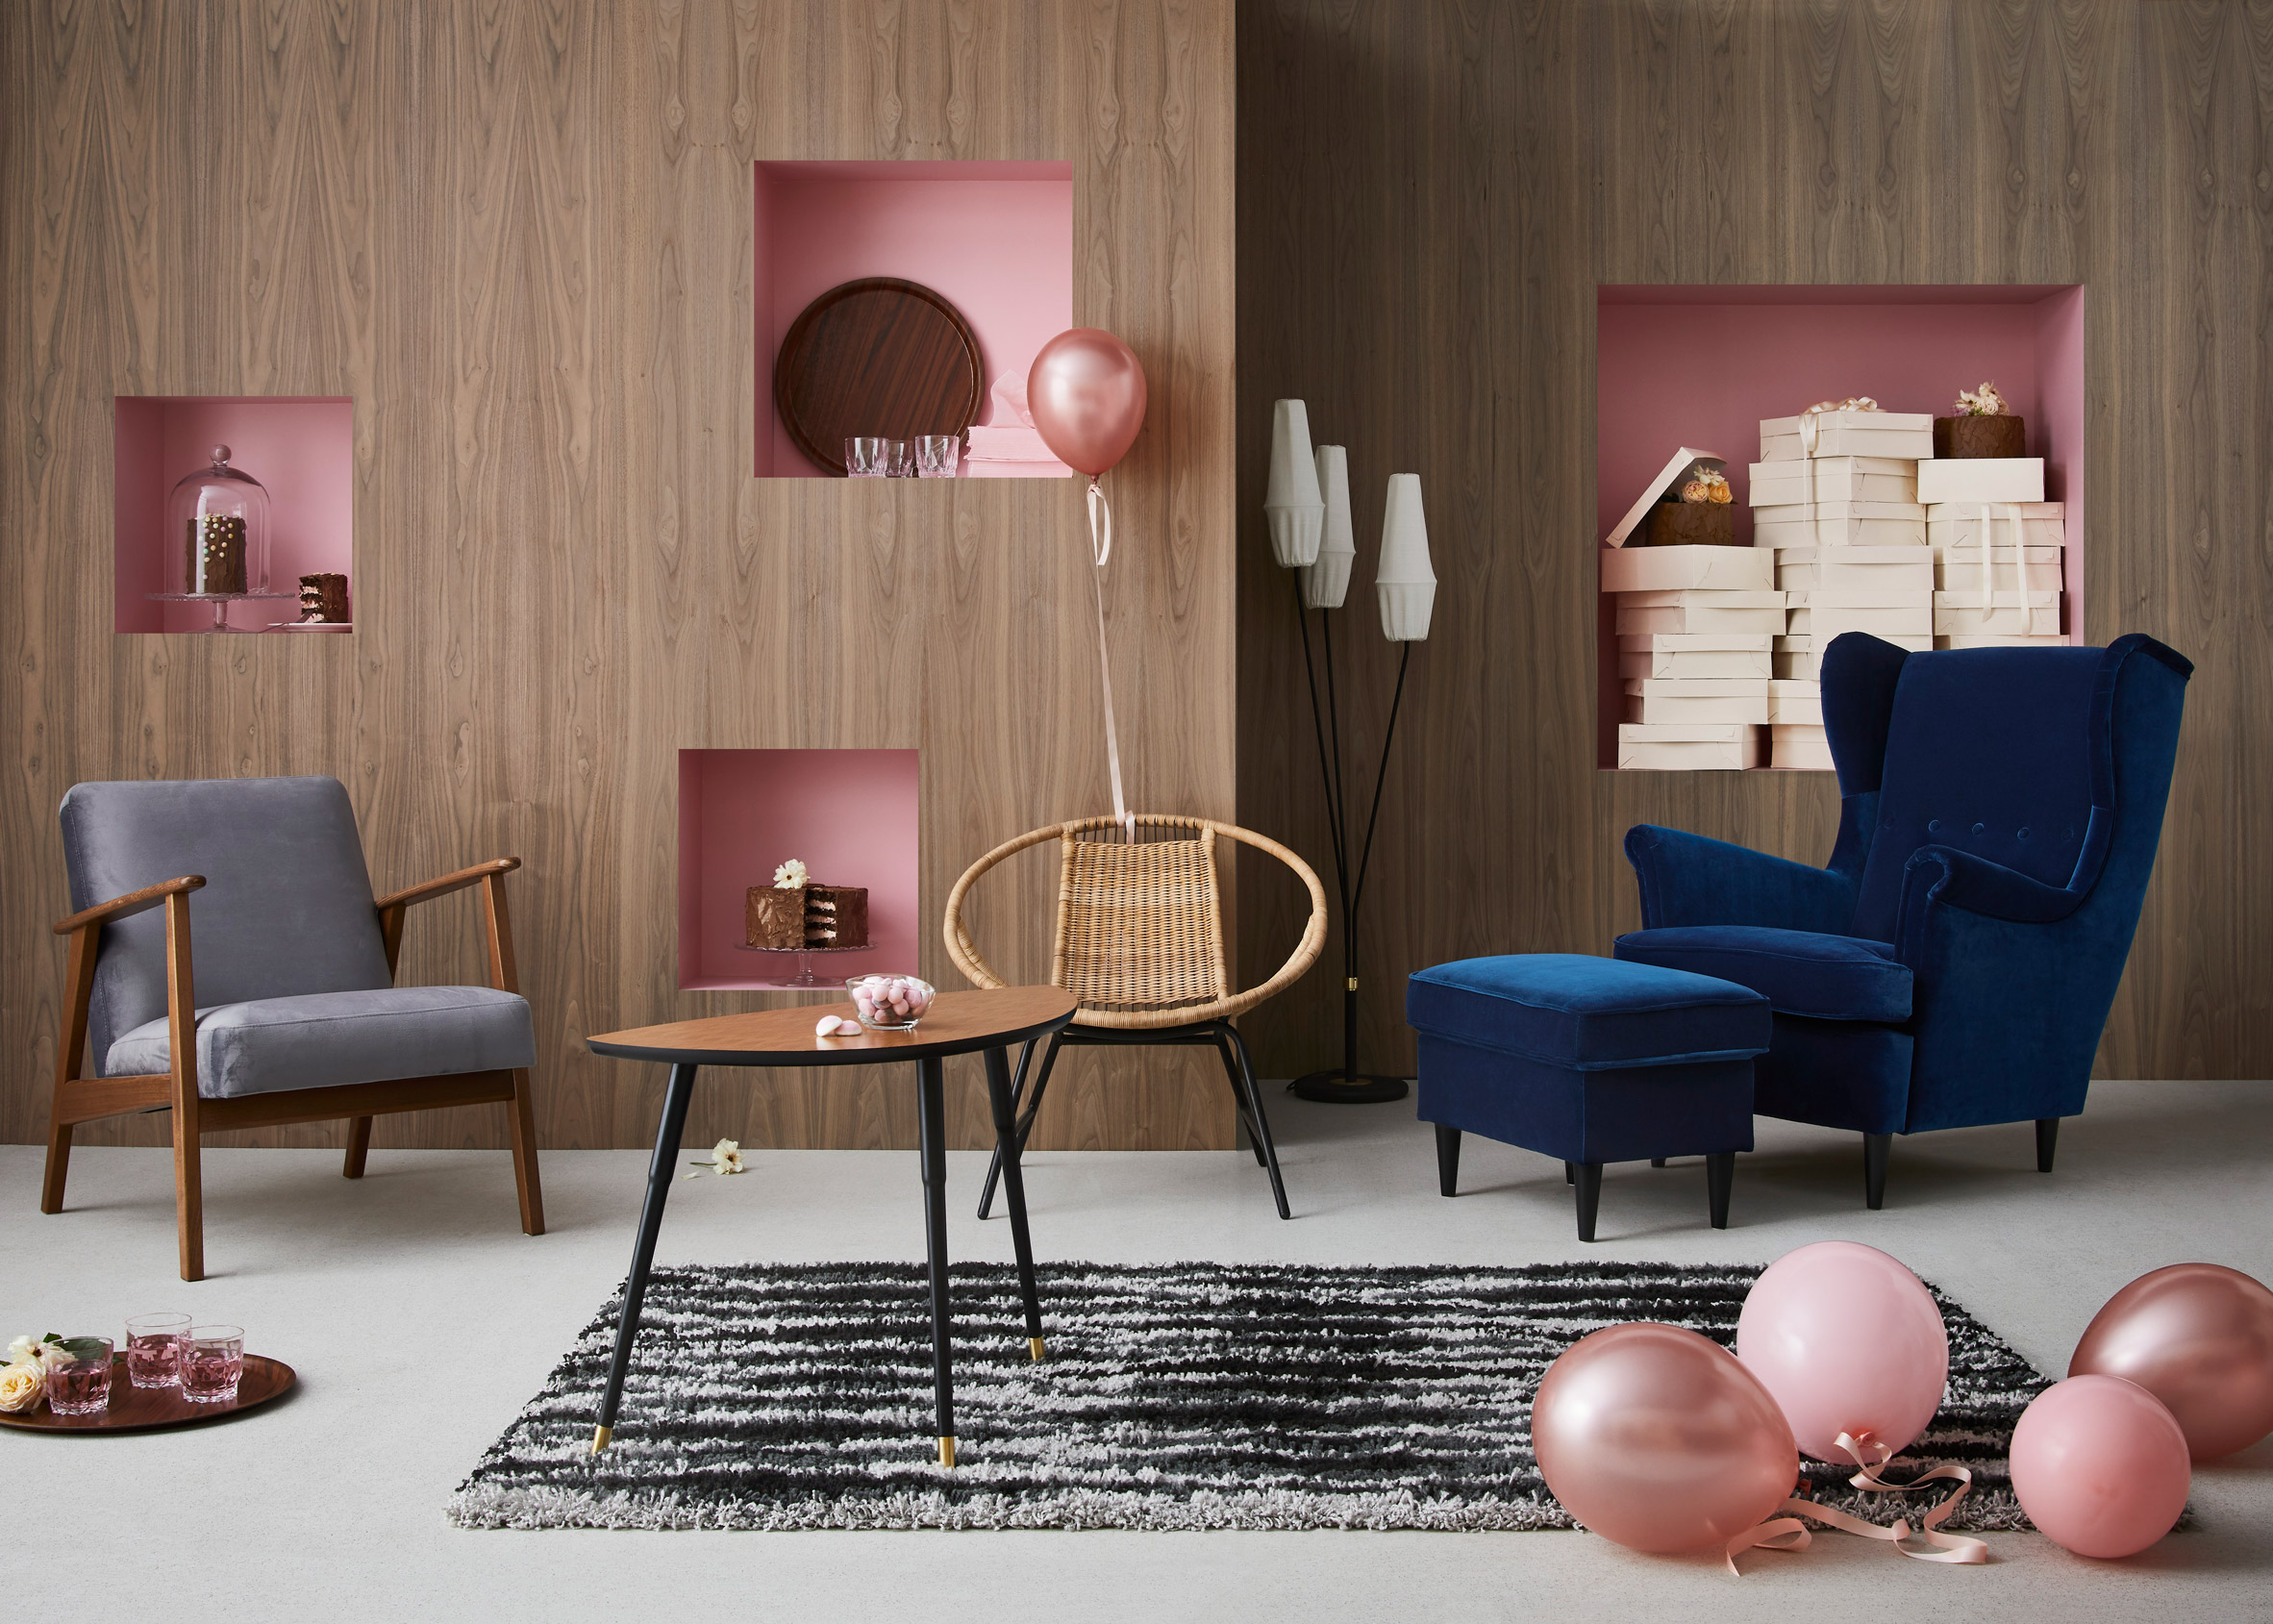 IKEA celebrates 75th anniversary with furniture collection